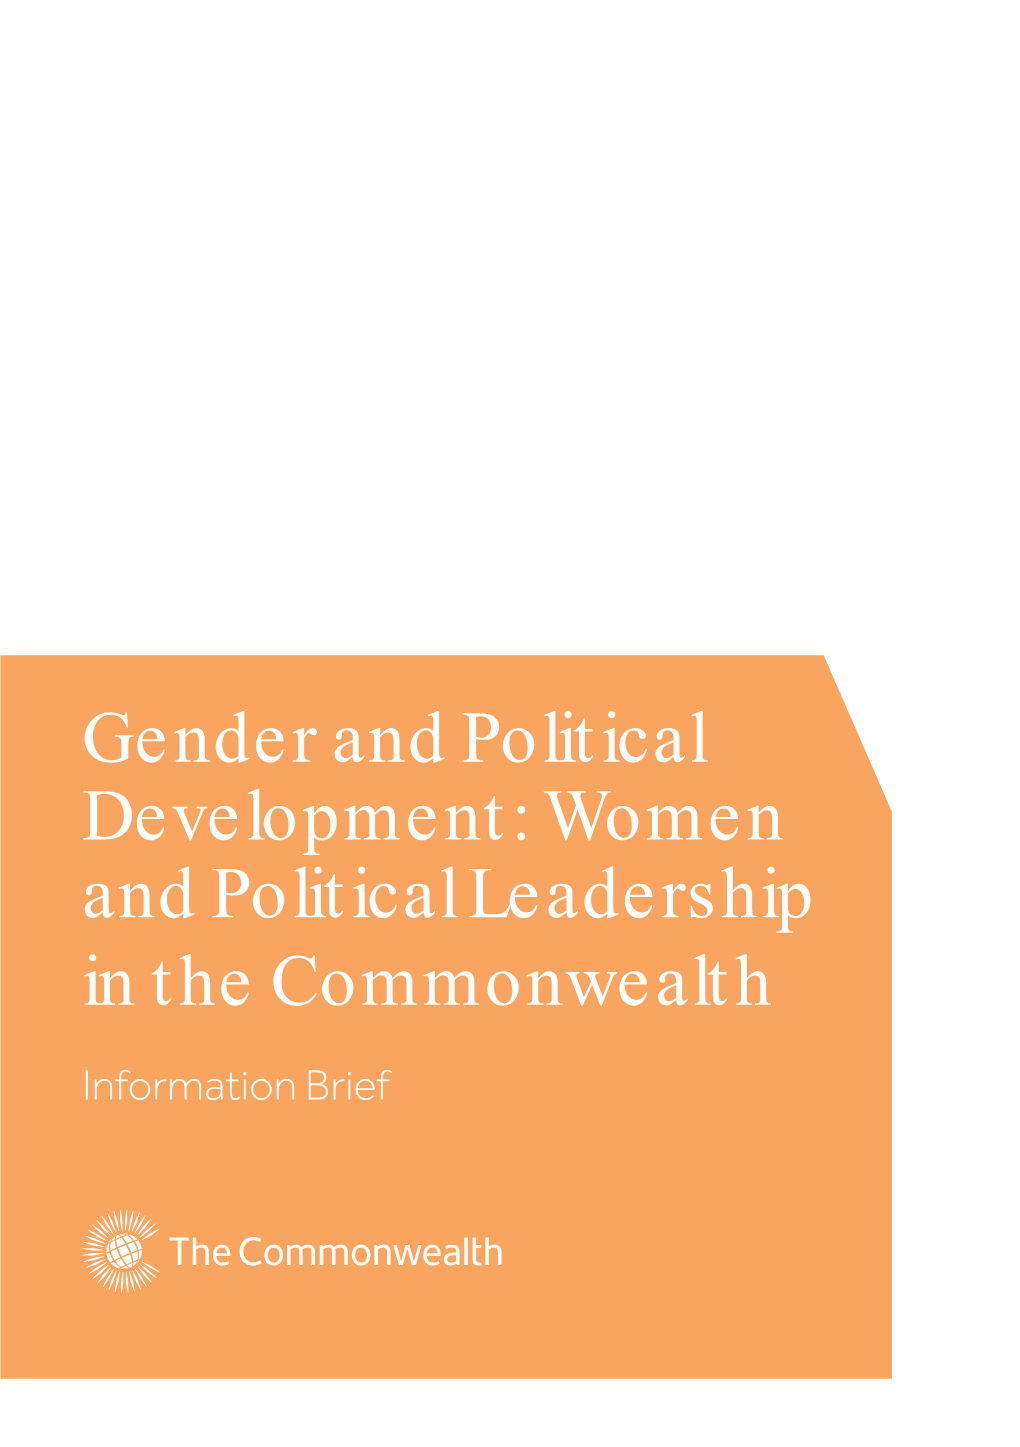 Gender and Political Development: Women and Political Leadership in the Commonwealth Information Brief